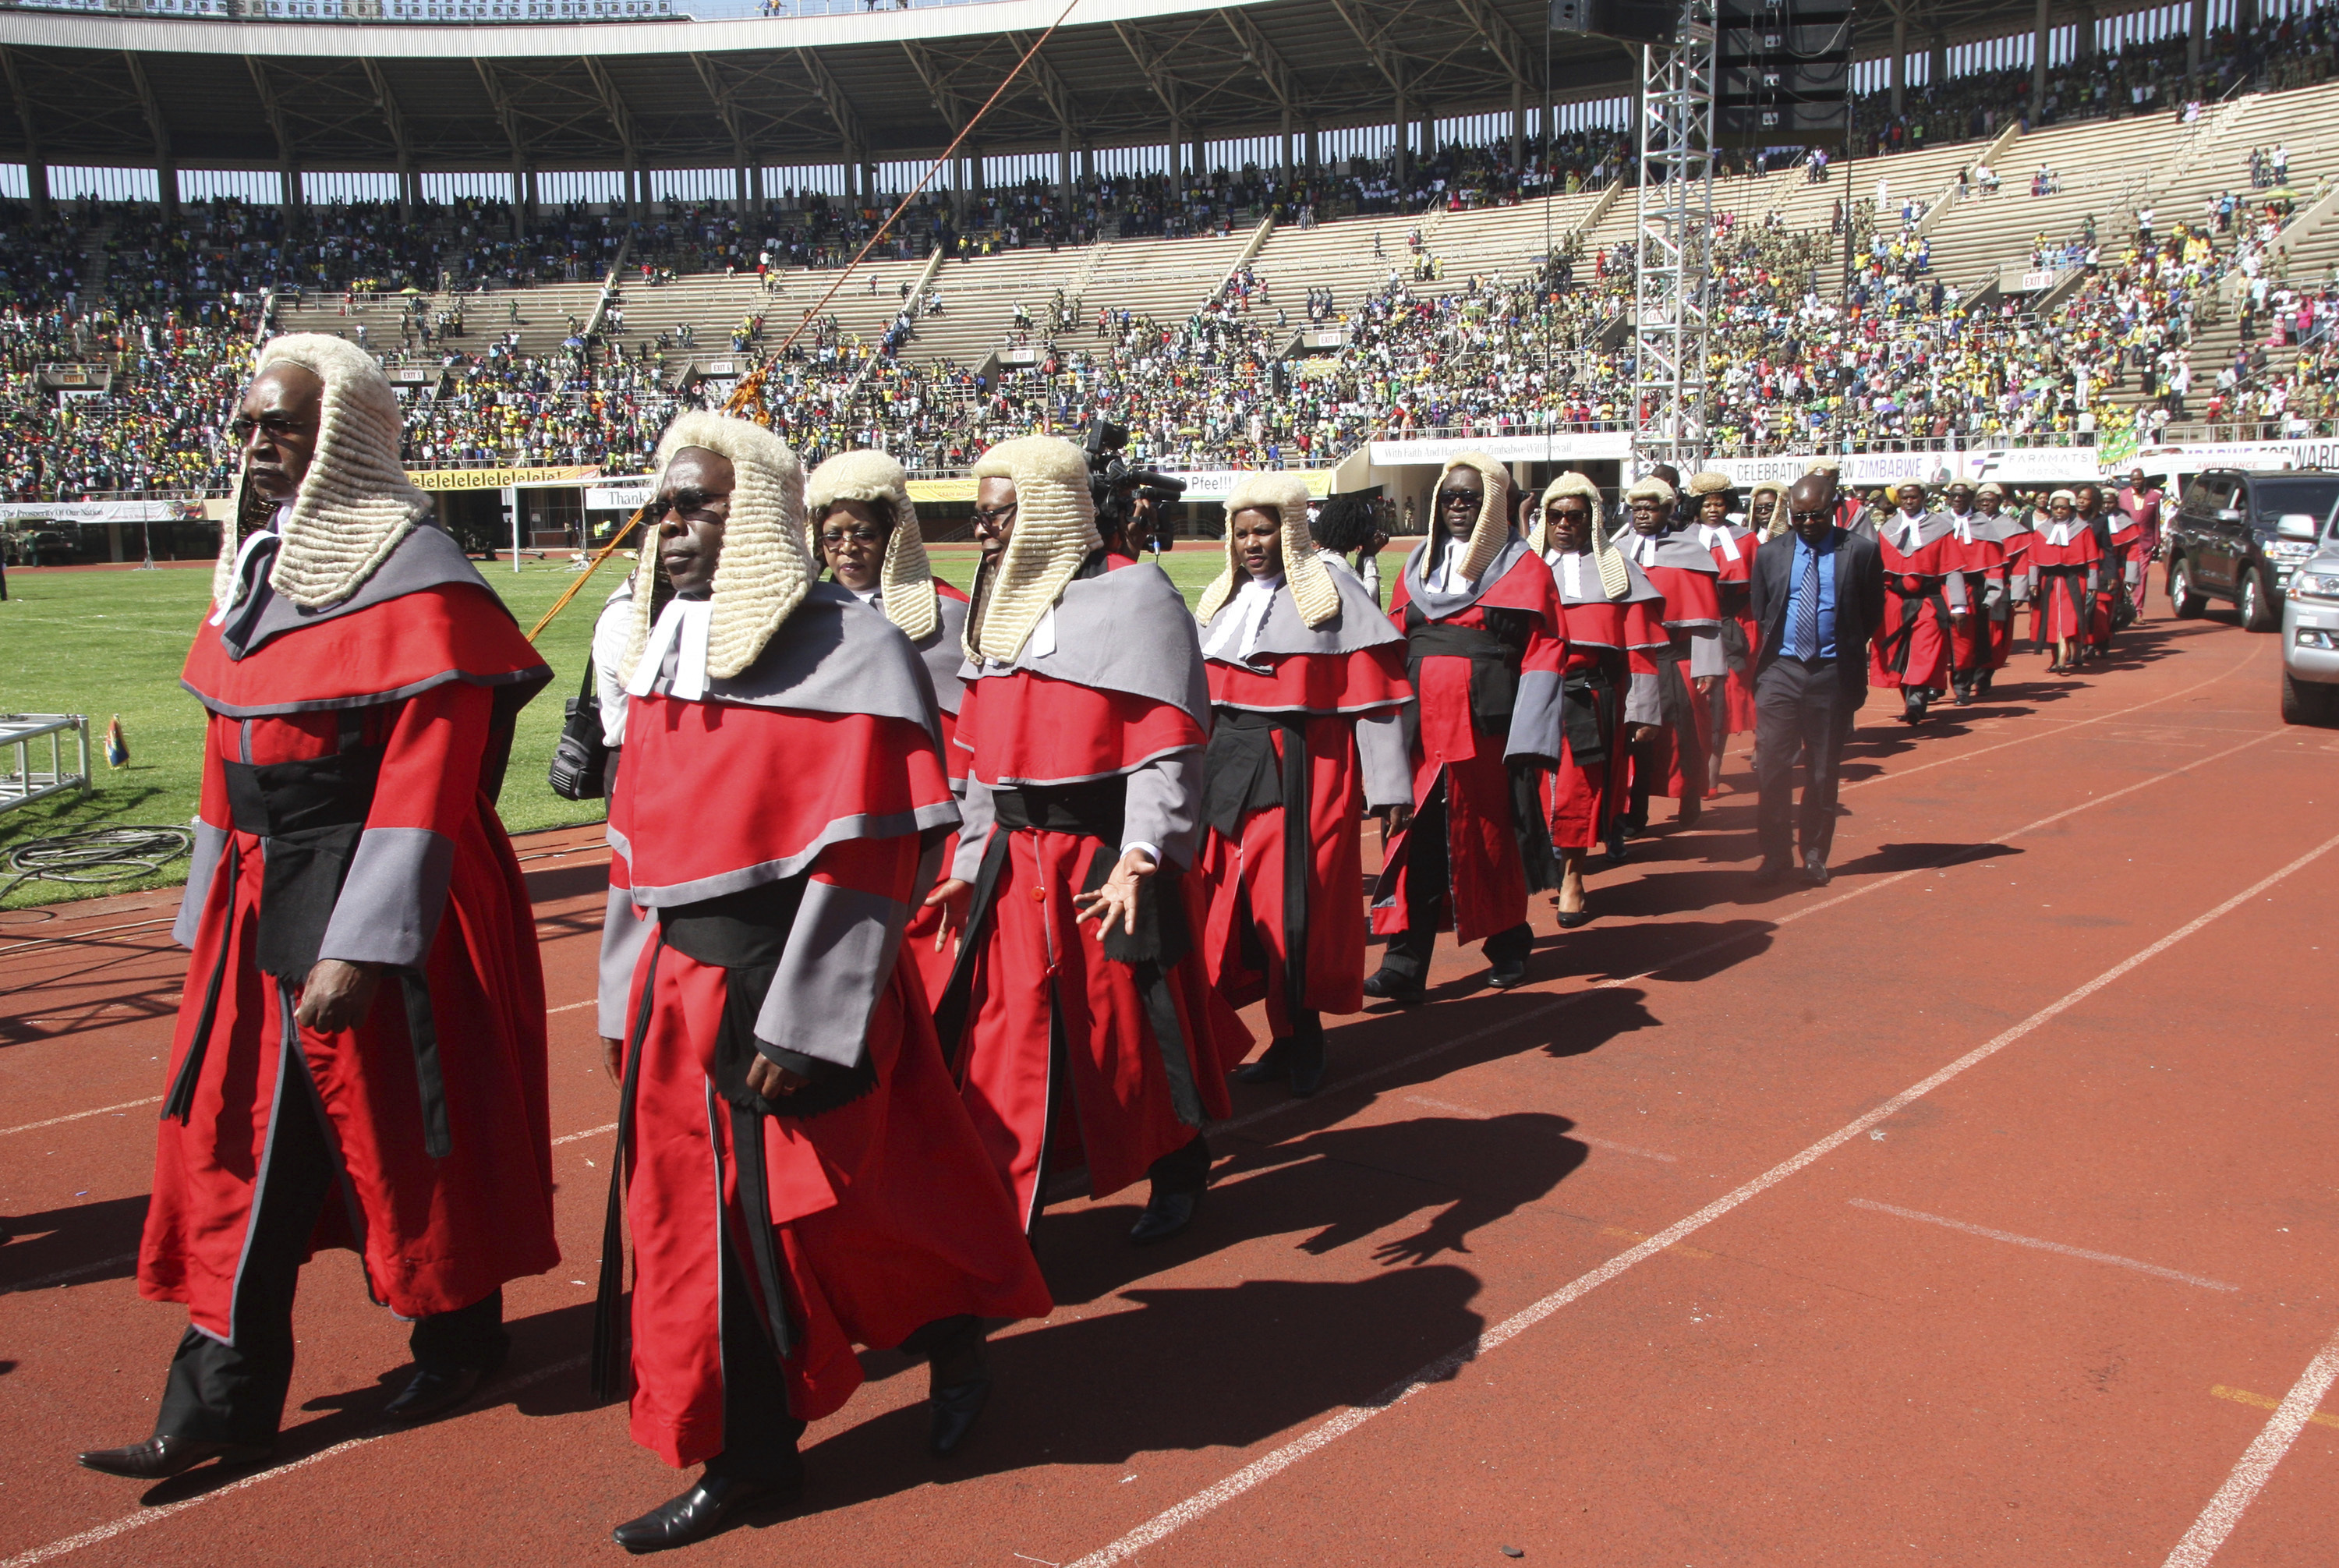 Judges arrive for the inauguration ceremony of Zimbabwean President Emmerson Mnangagwa at the National Sports Stadium in Harare 